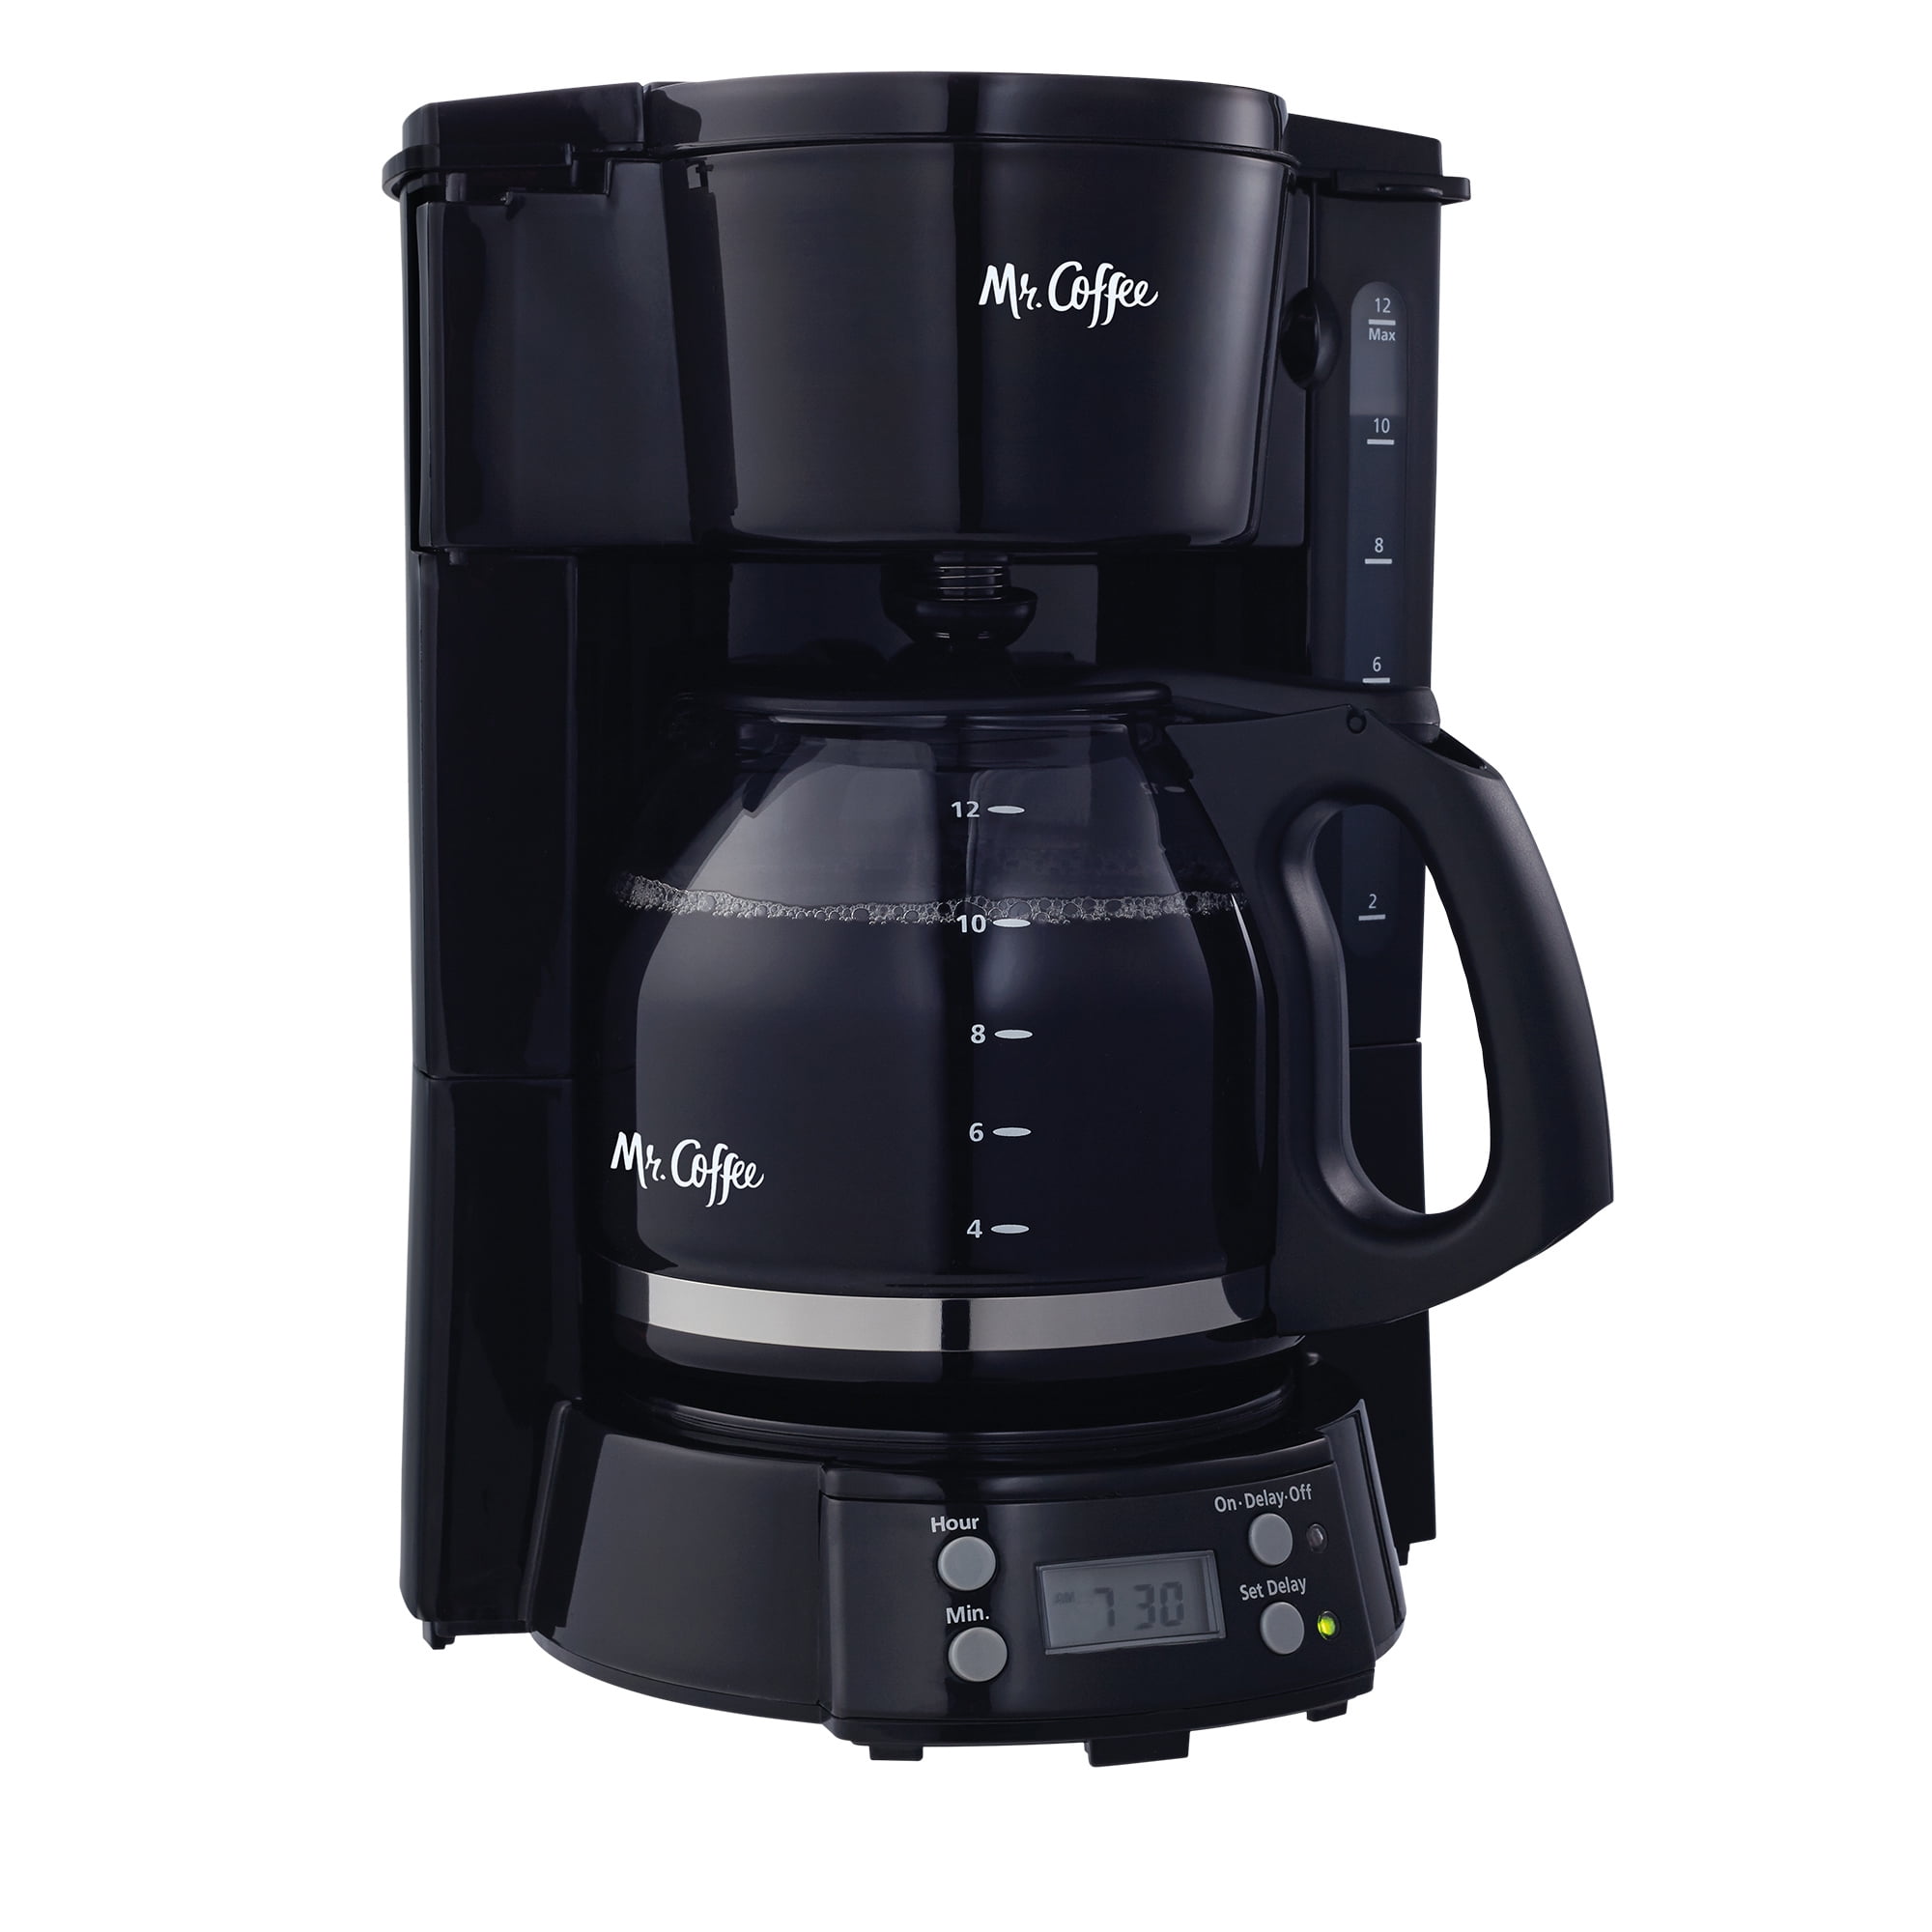 Mr. Coffee® Programmable 12-Cup Coffee Maker - Black, 1 ct - City